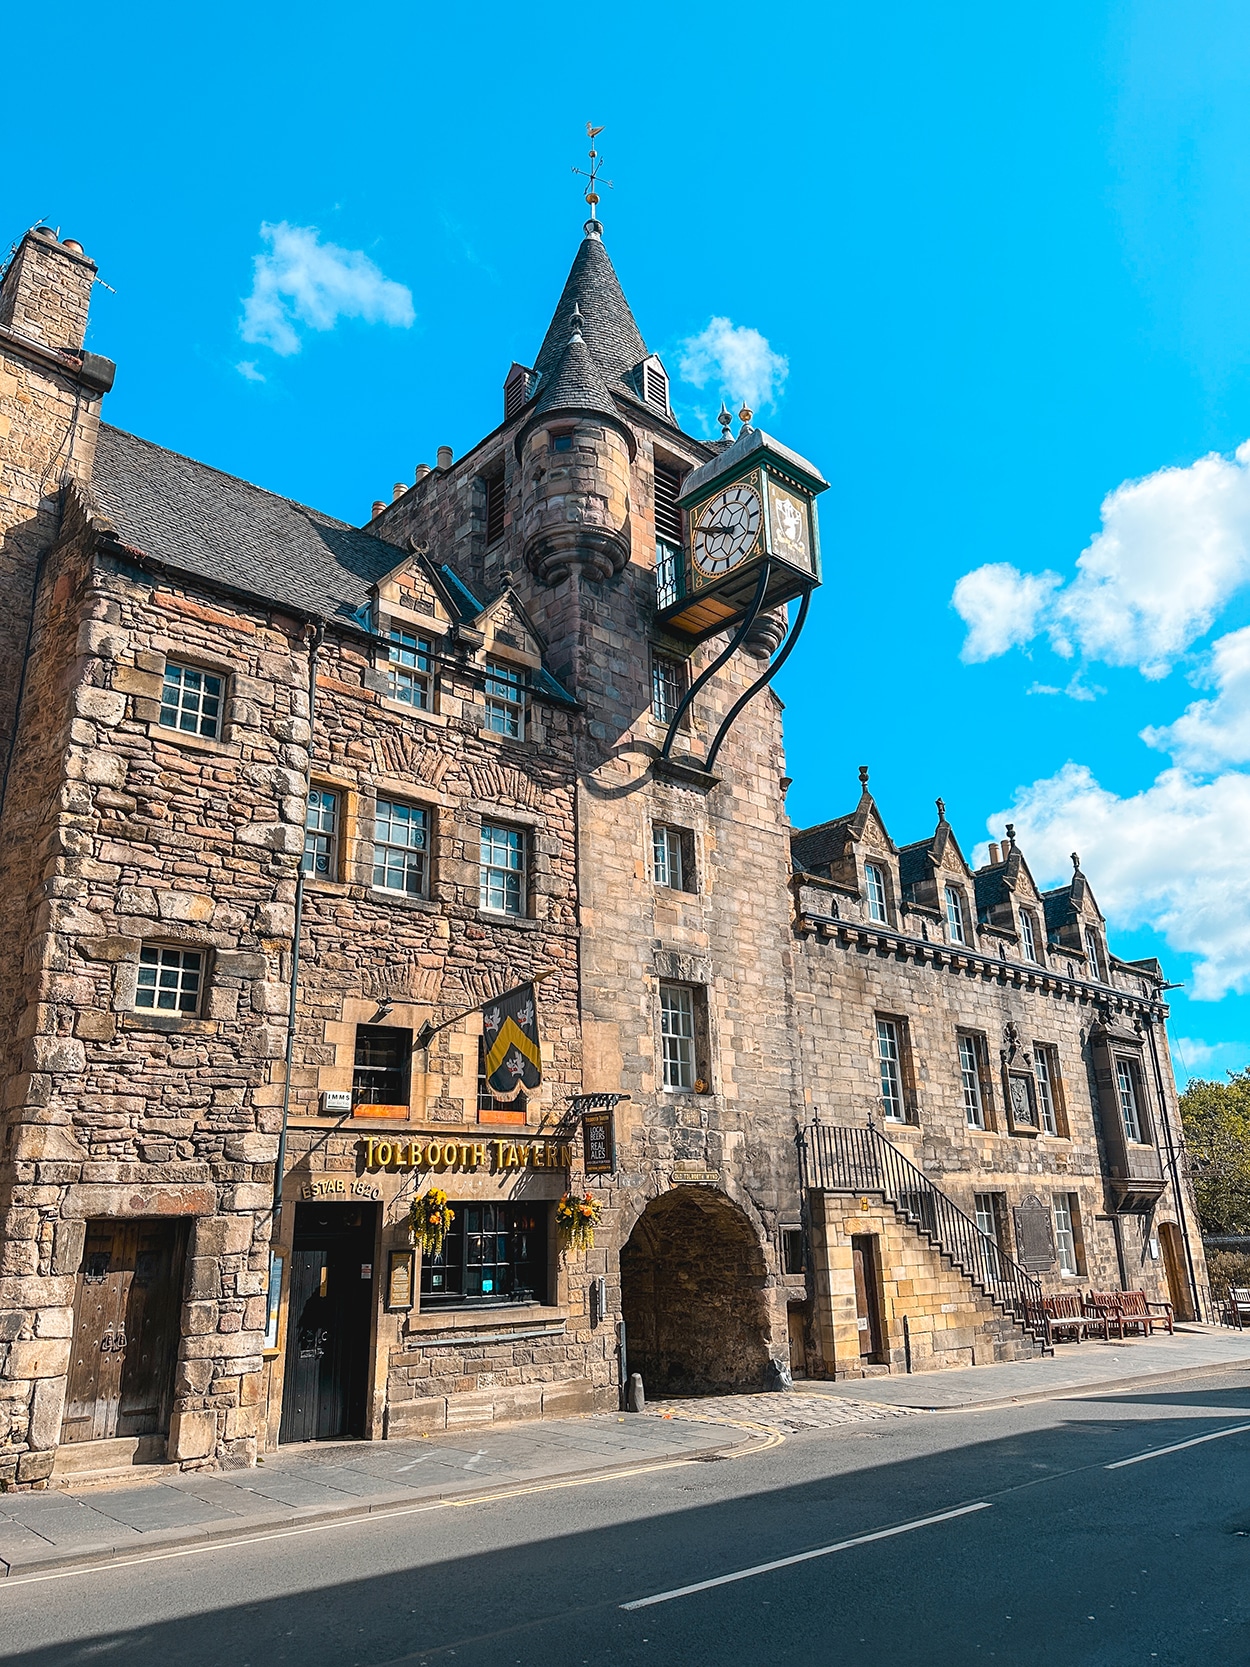 Tolbooth Tavern and the People's Story Museum in Edinburgh- photo by Keryn Means editor of Twist Travel Magazine